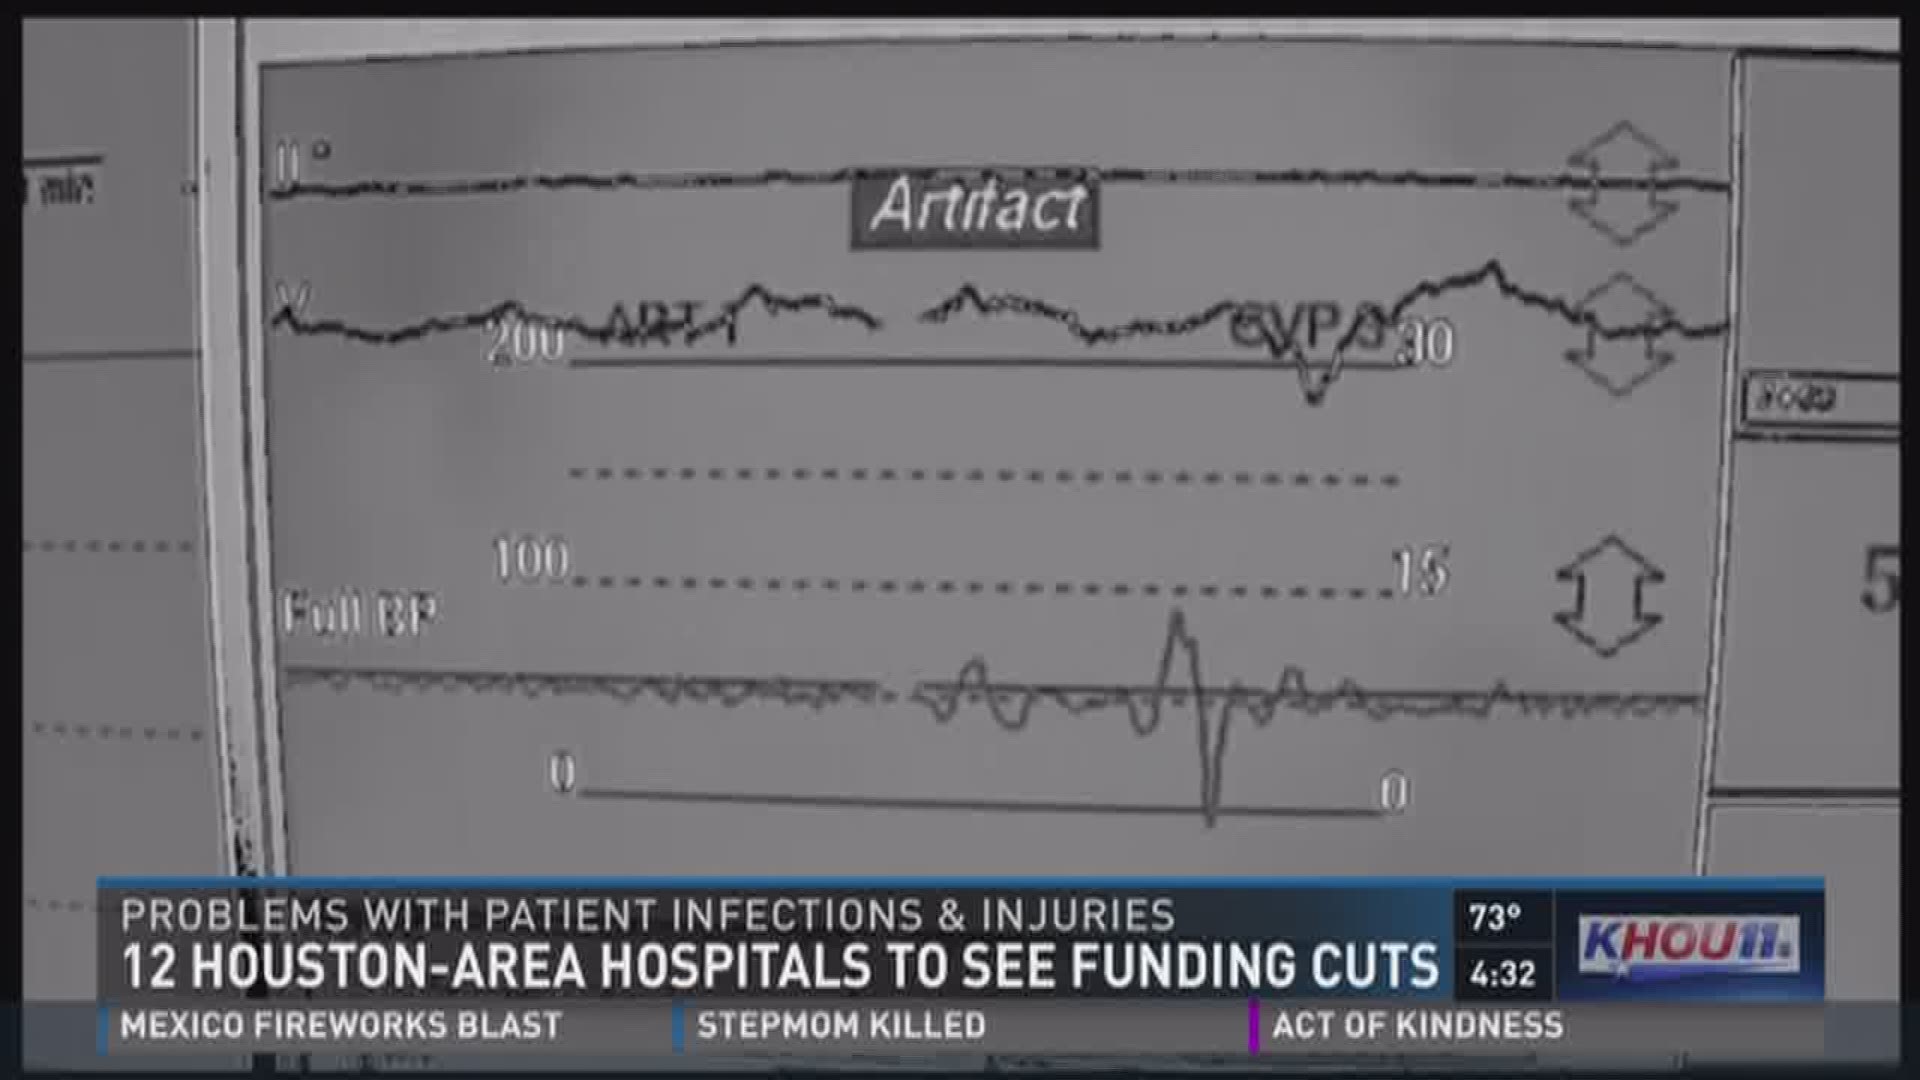 12 Houston-area hospitals to see funding cuts.